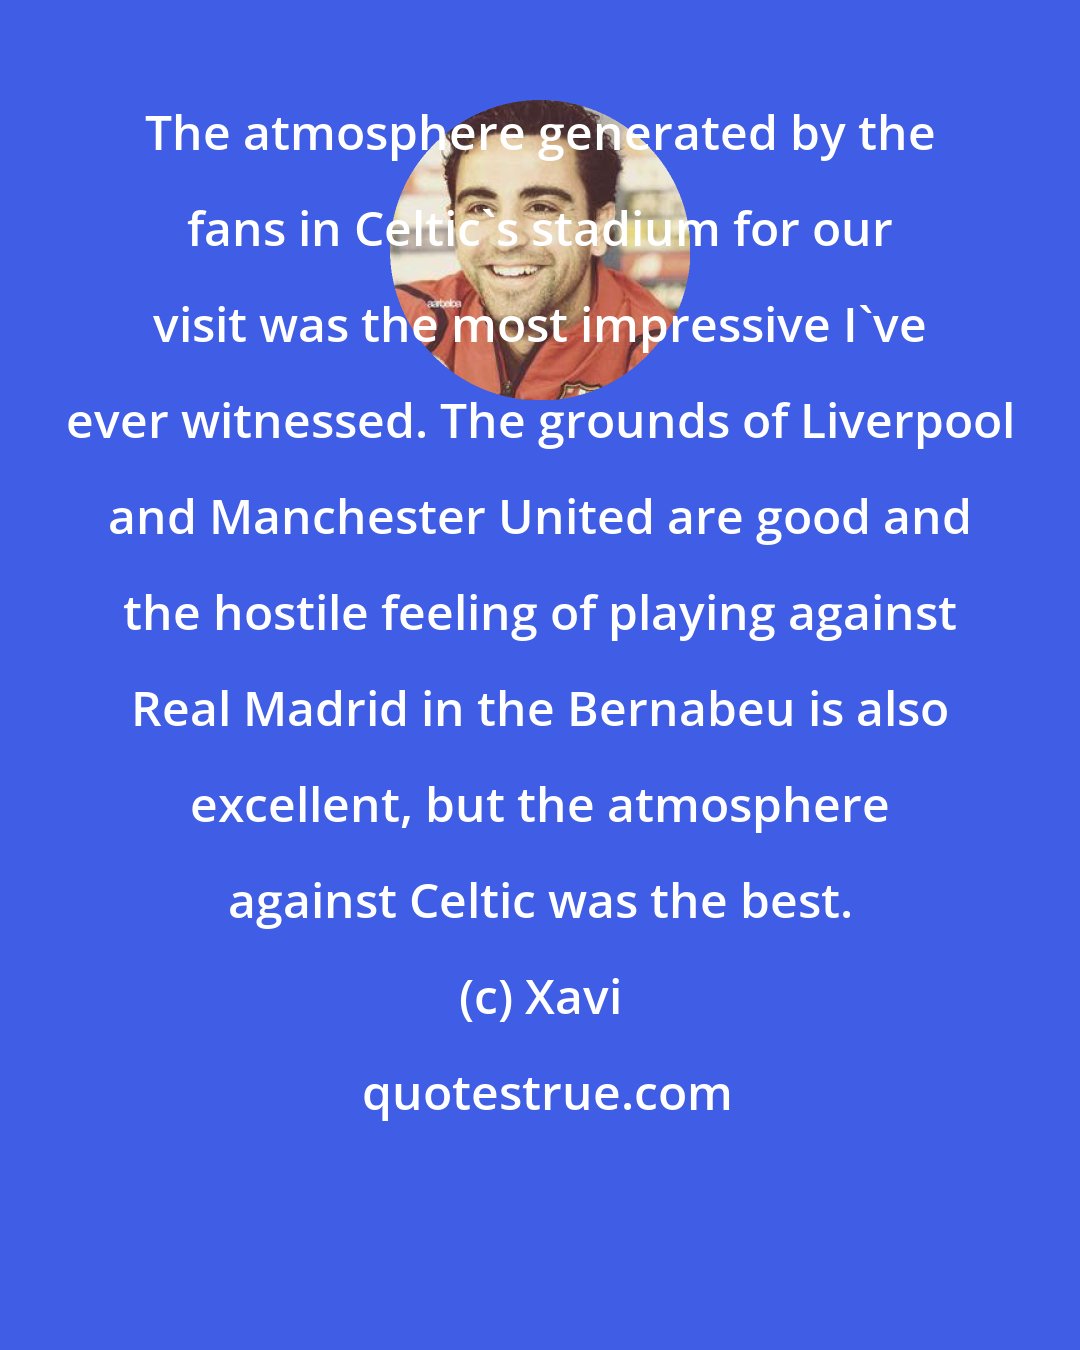 Xavi: The atmosphere generated by the fans in Celtic's stadium for our visit was the most impressive I've ever witnessed. The grounds of Liverpool and Manchester United are good and the hostile feeling of playing against Real Madrid in the Bernabeu is also excellent, but the atmosphere against Celtic was the best.